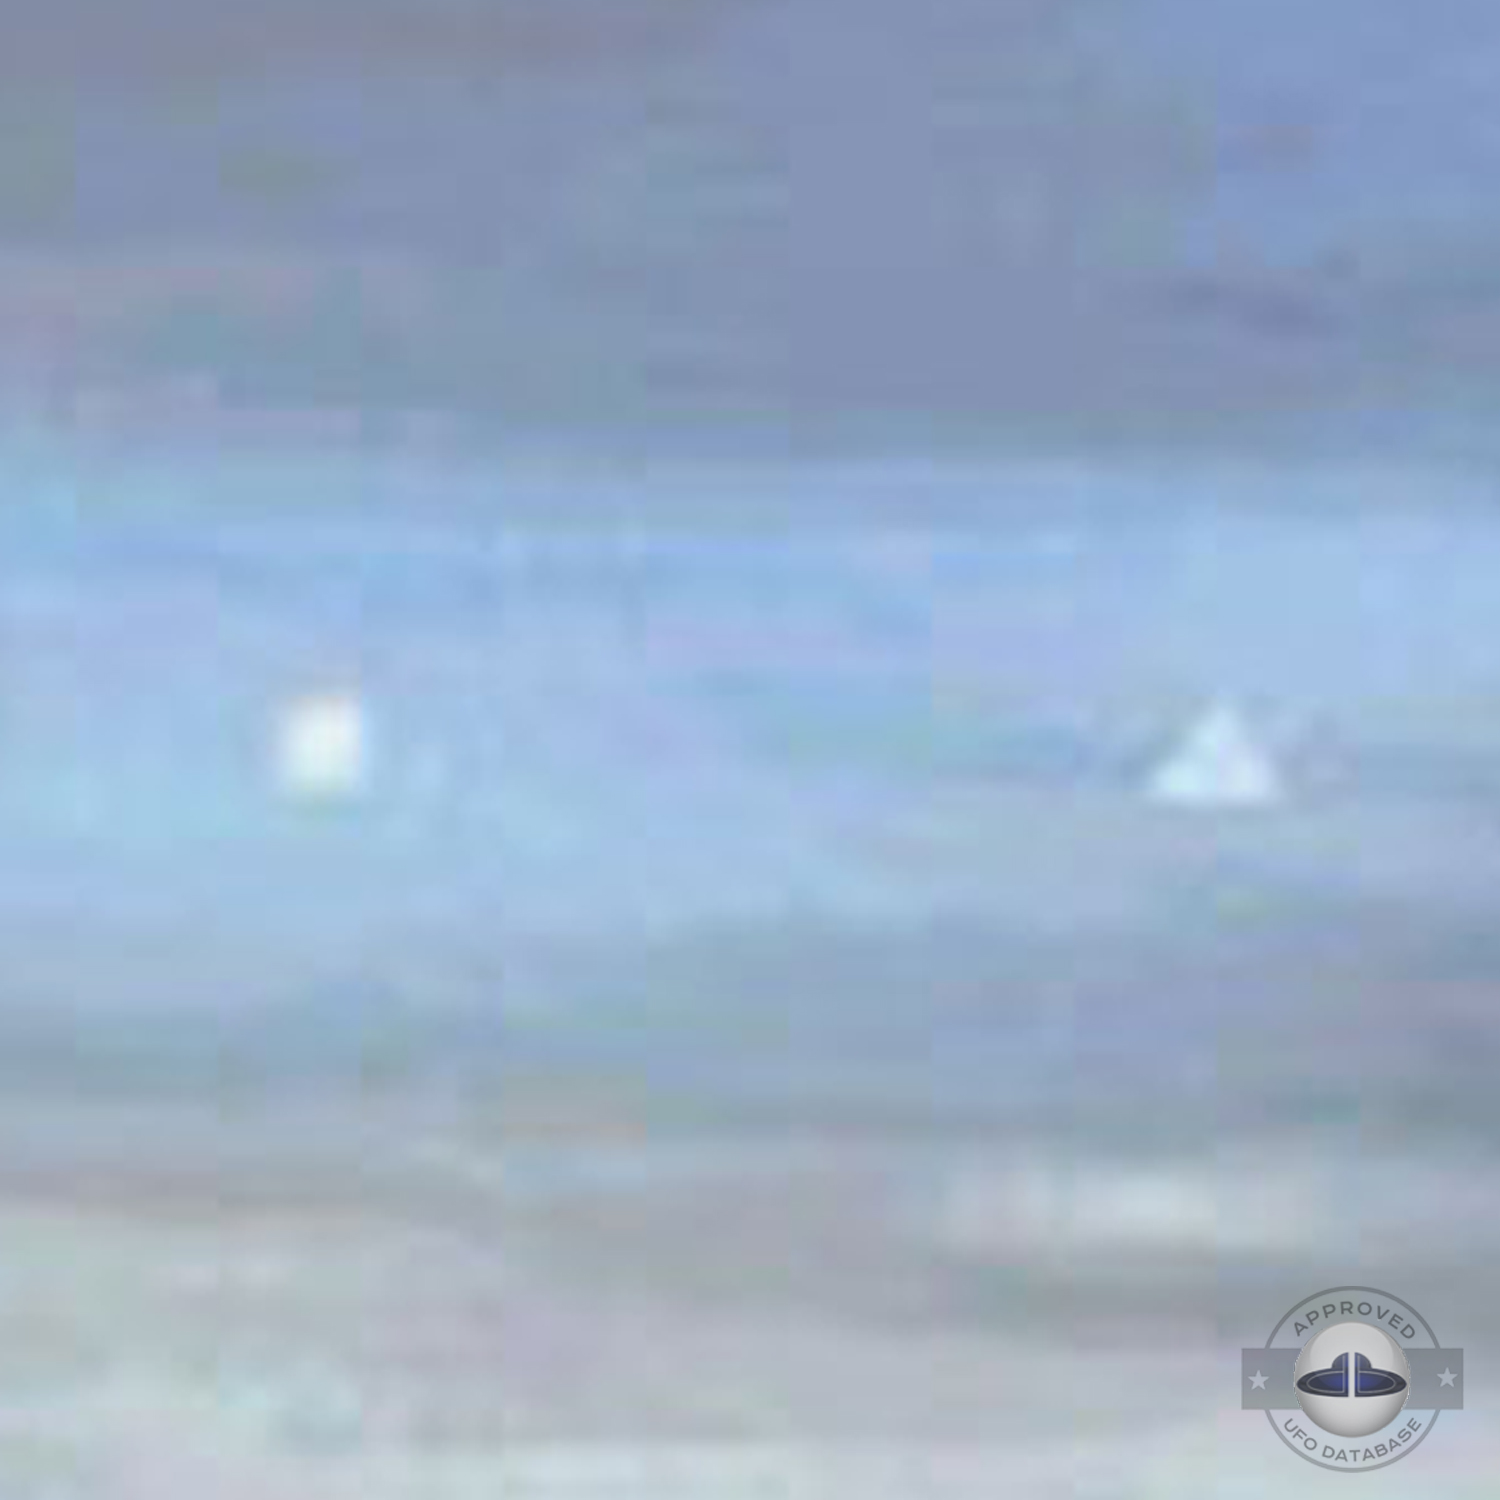 UFO seen at the end of the south American continent Tierra del Fuego UFO Picture #26-4